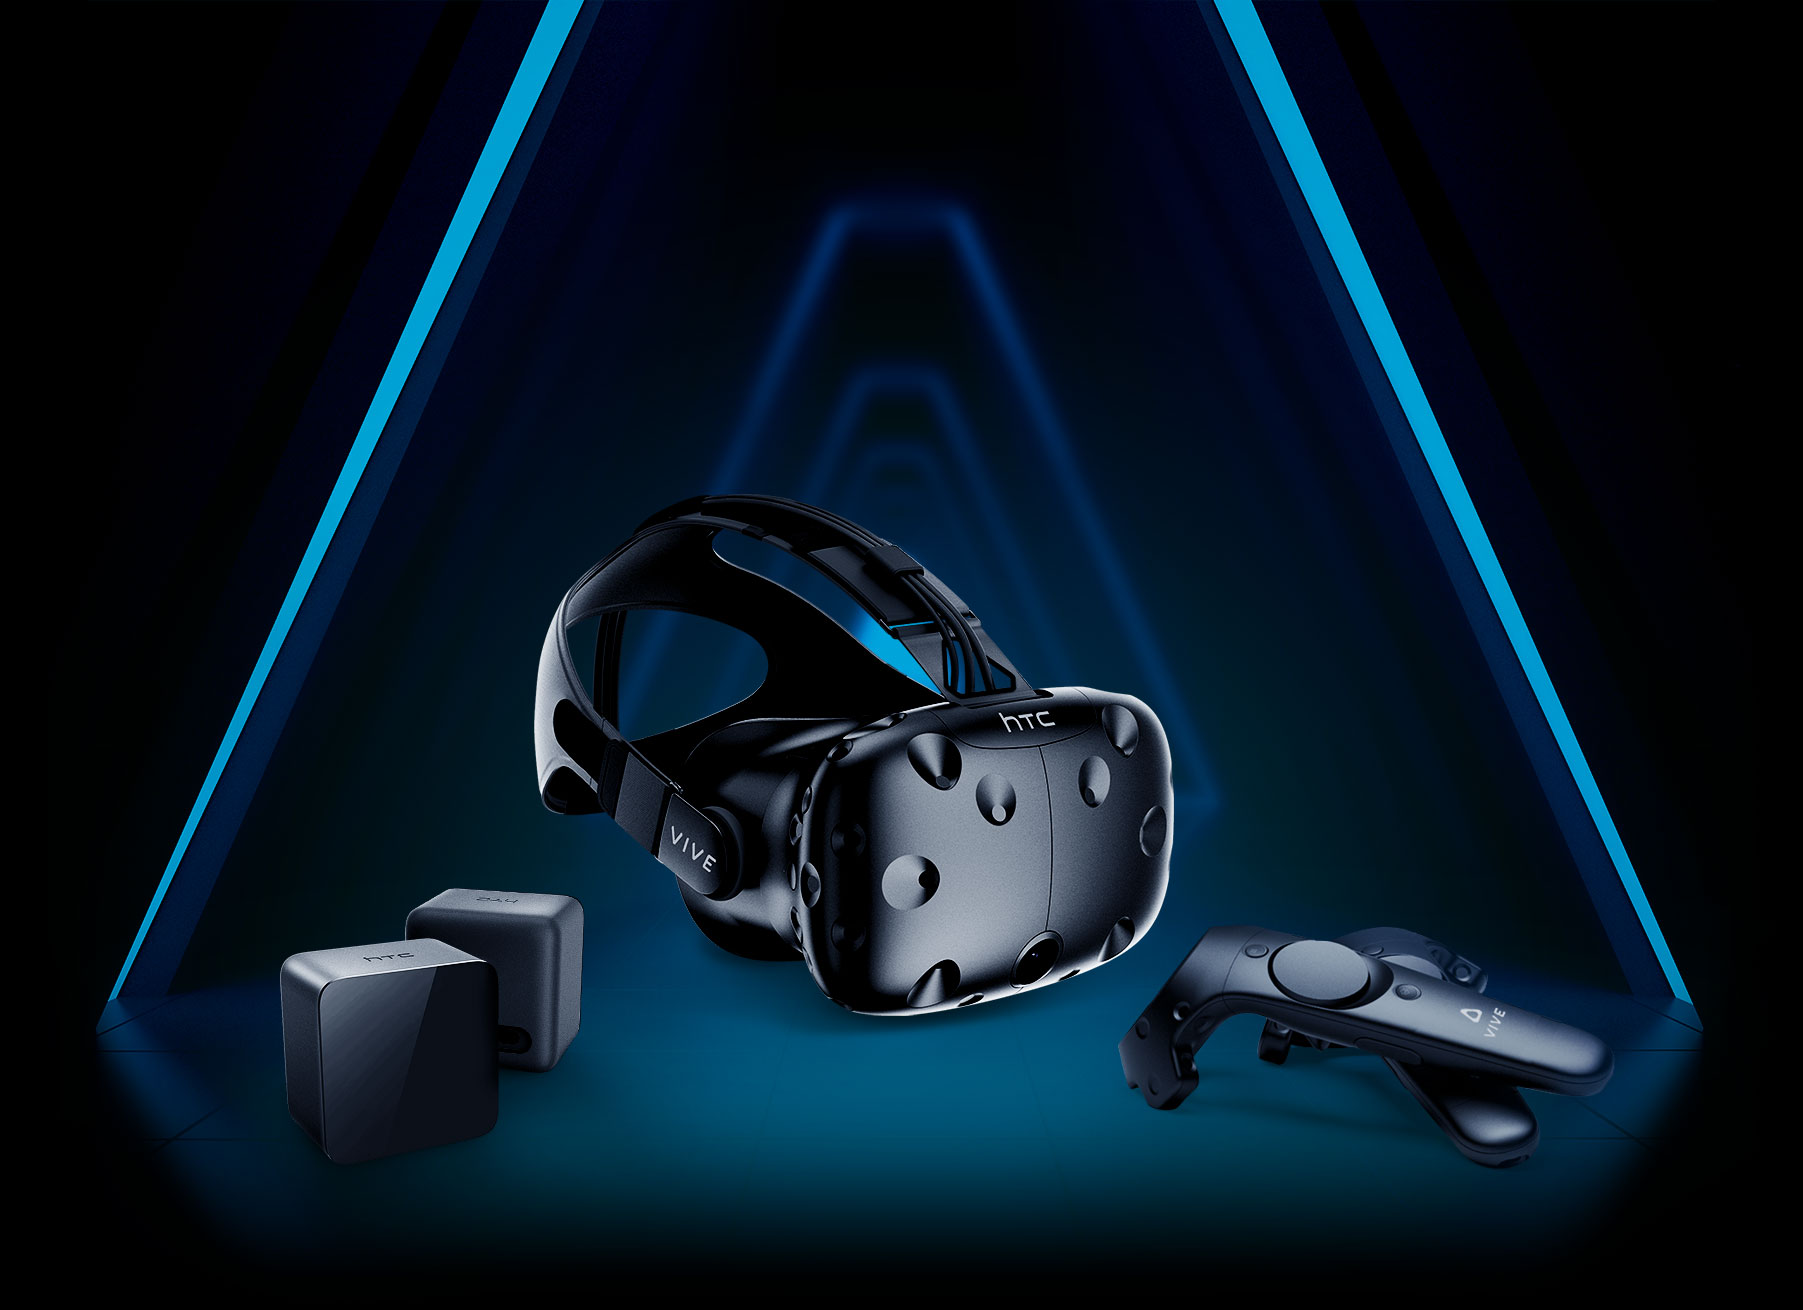 VIVE Headset, Base Stations, and Controllers